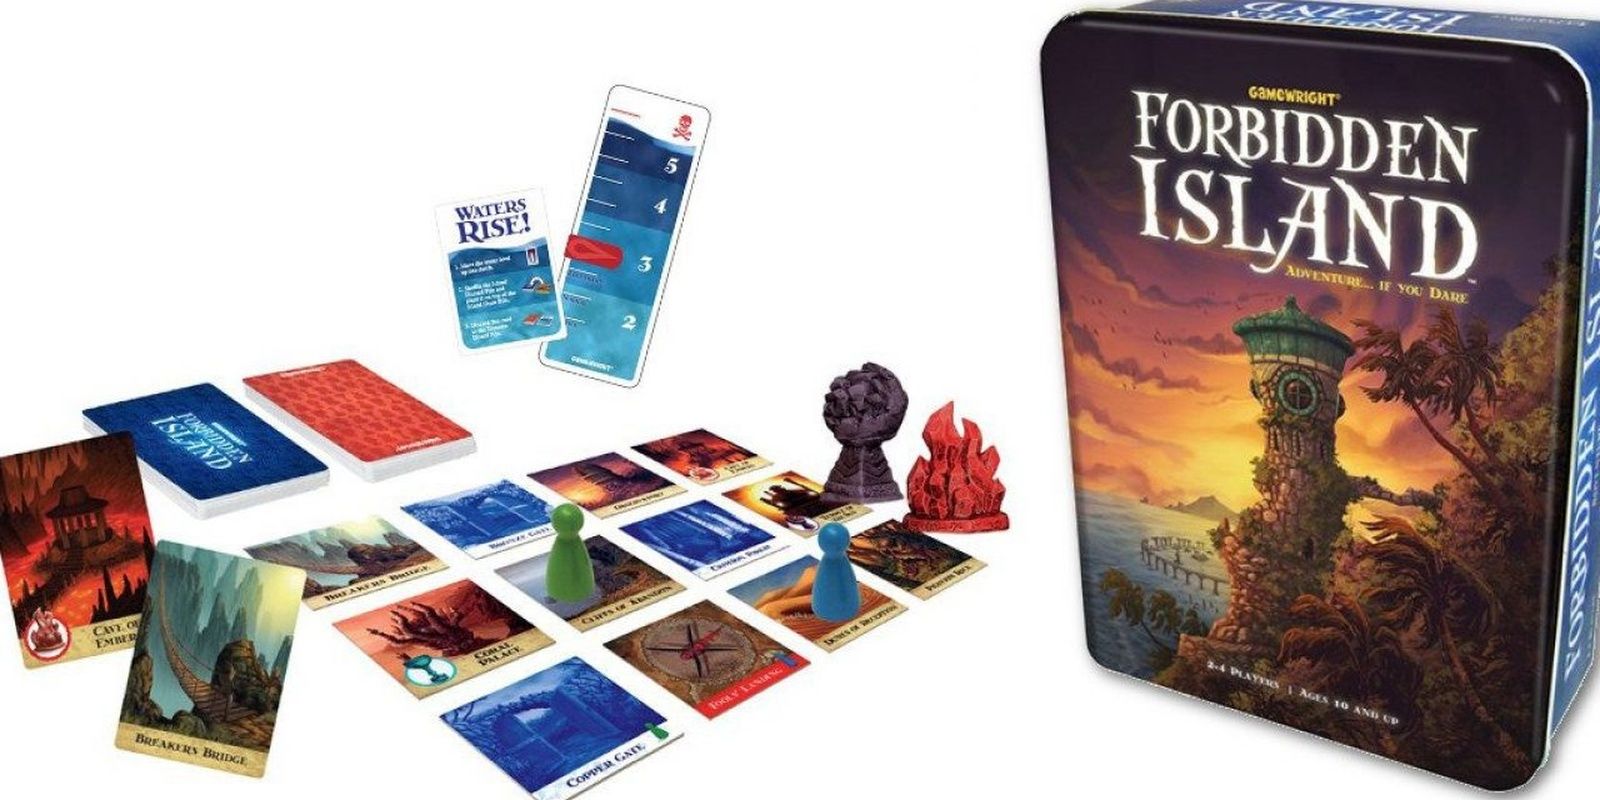 Forbidden Island Board Game Components Inside The Box